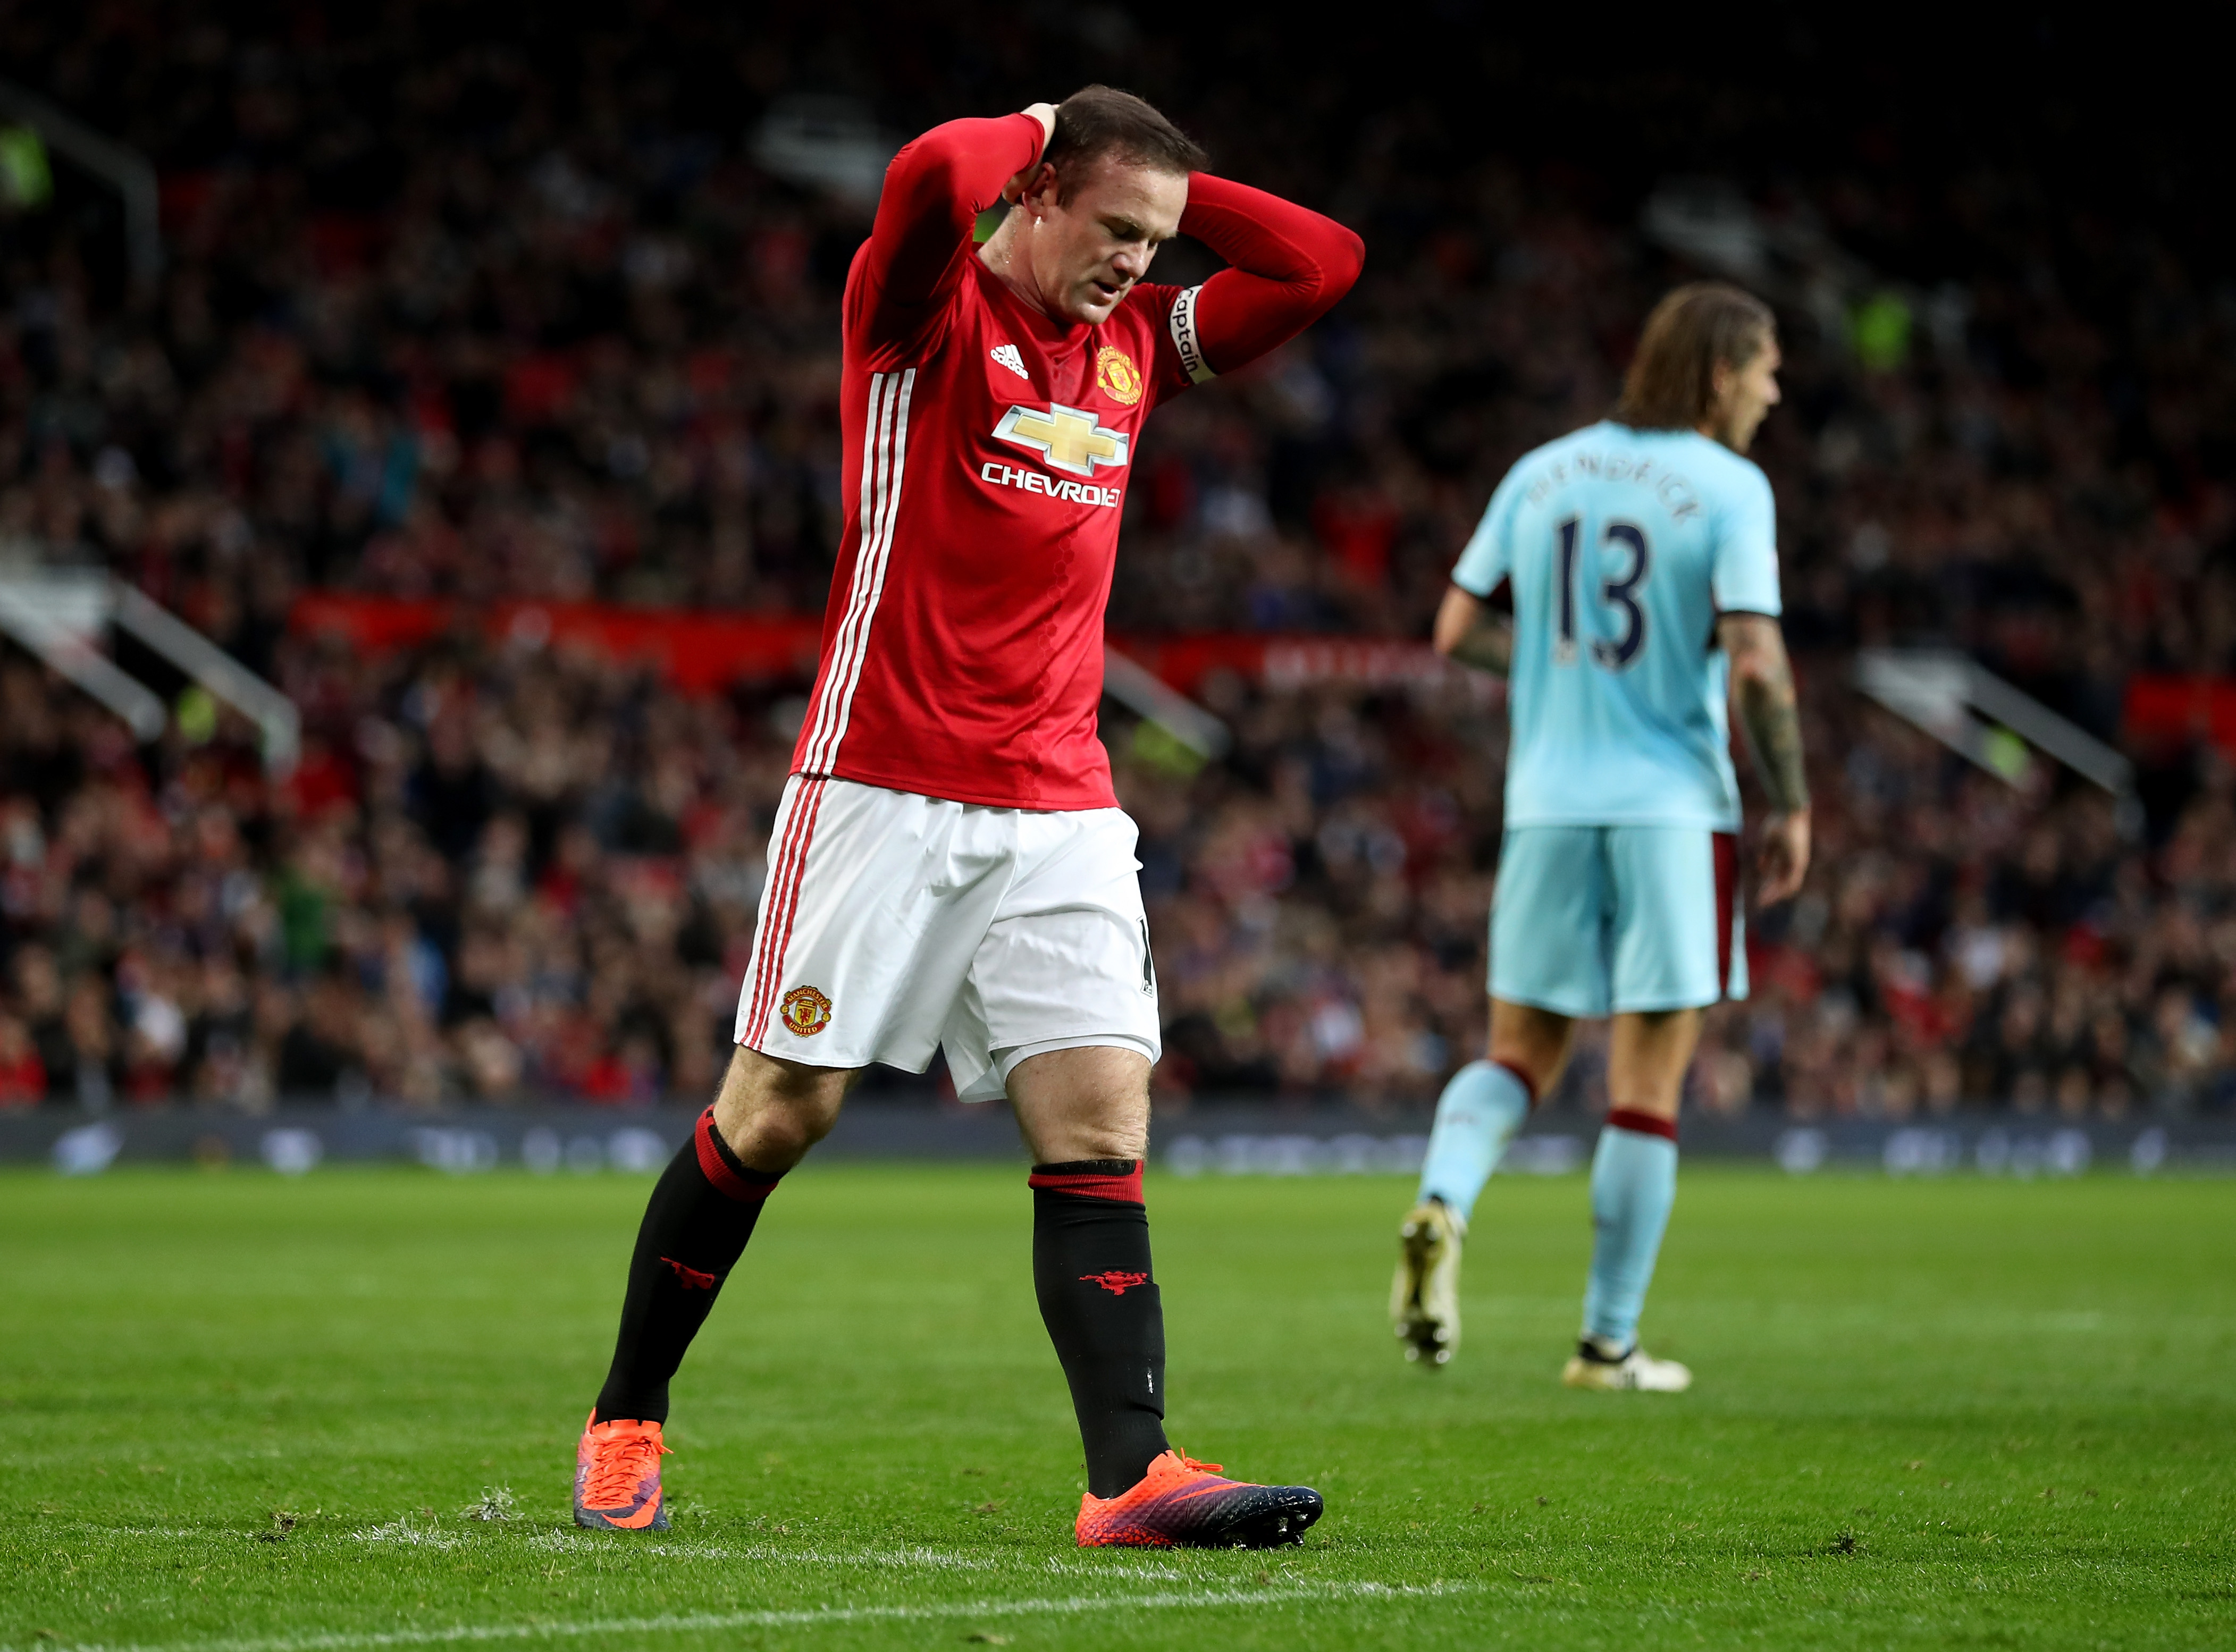 MANCHESTER, ENGLAND - OCTOBER 29: Wayne Rooney of Manchester United reacts during the Premier League match between Manchester United and Burnley at Old Trafford on October 29, 2016 in Manchester, England.  (Photo by Mark Robinson/Getty Images)